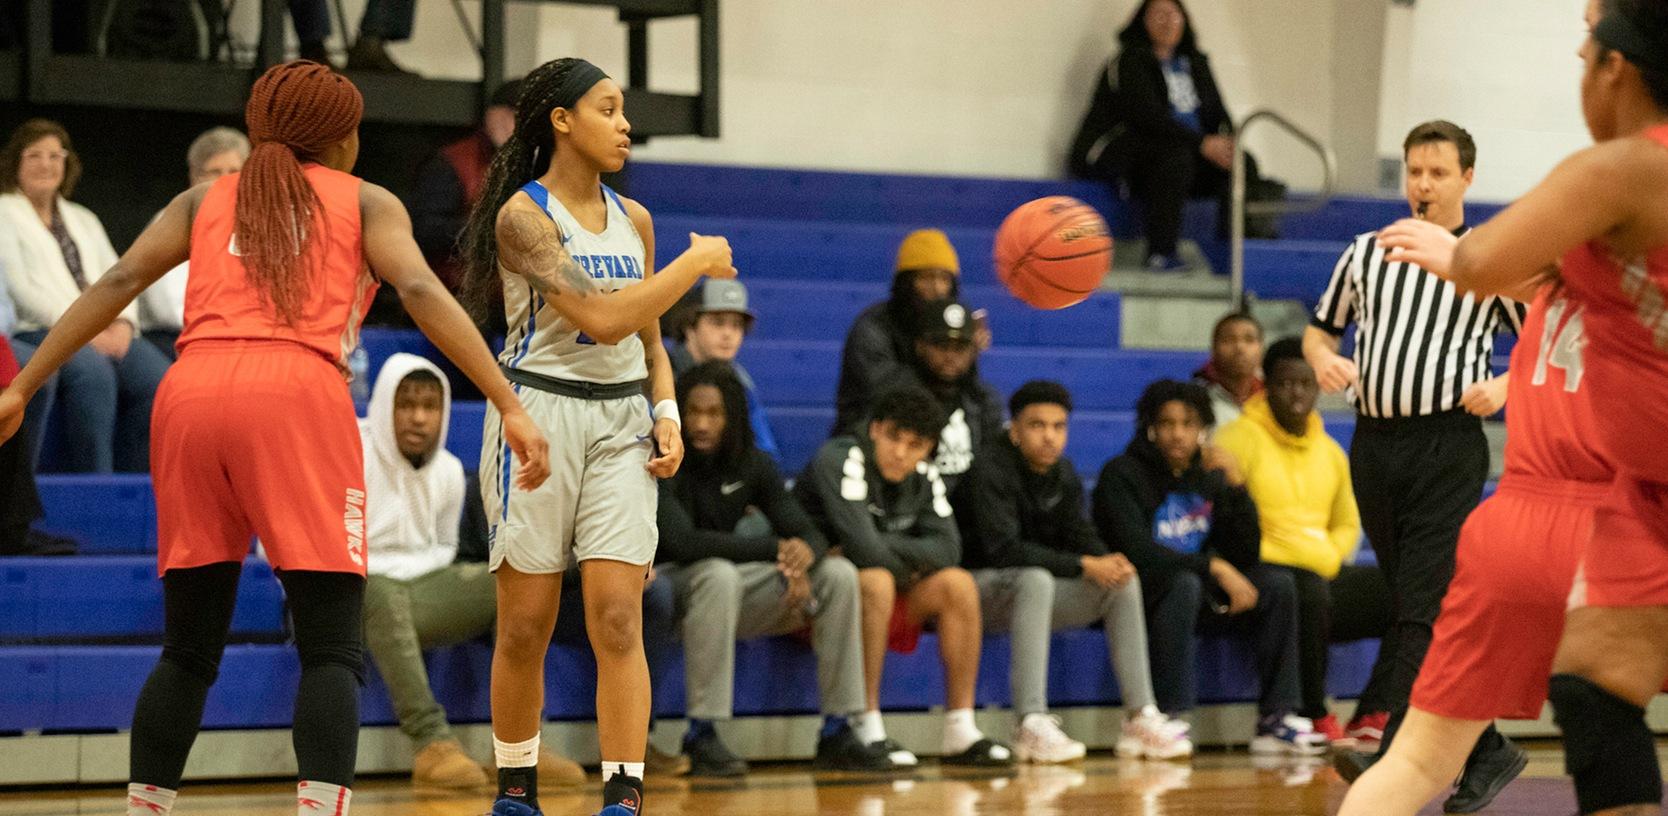 In her first game action of the 2019-20 season, junior forward Destiny Williams posted a double-double (14 points, 10 rebunds) while recording three steals against Warren Wilson (Photo courtesy of Thom Kennedy '21).